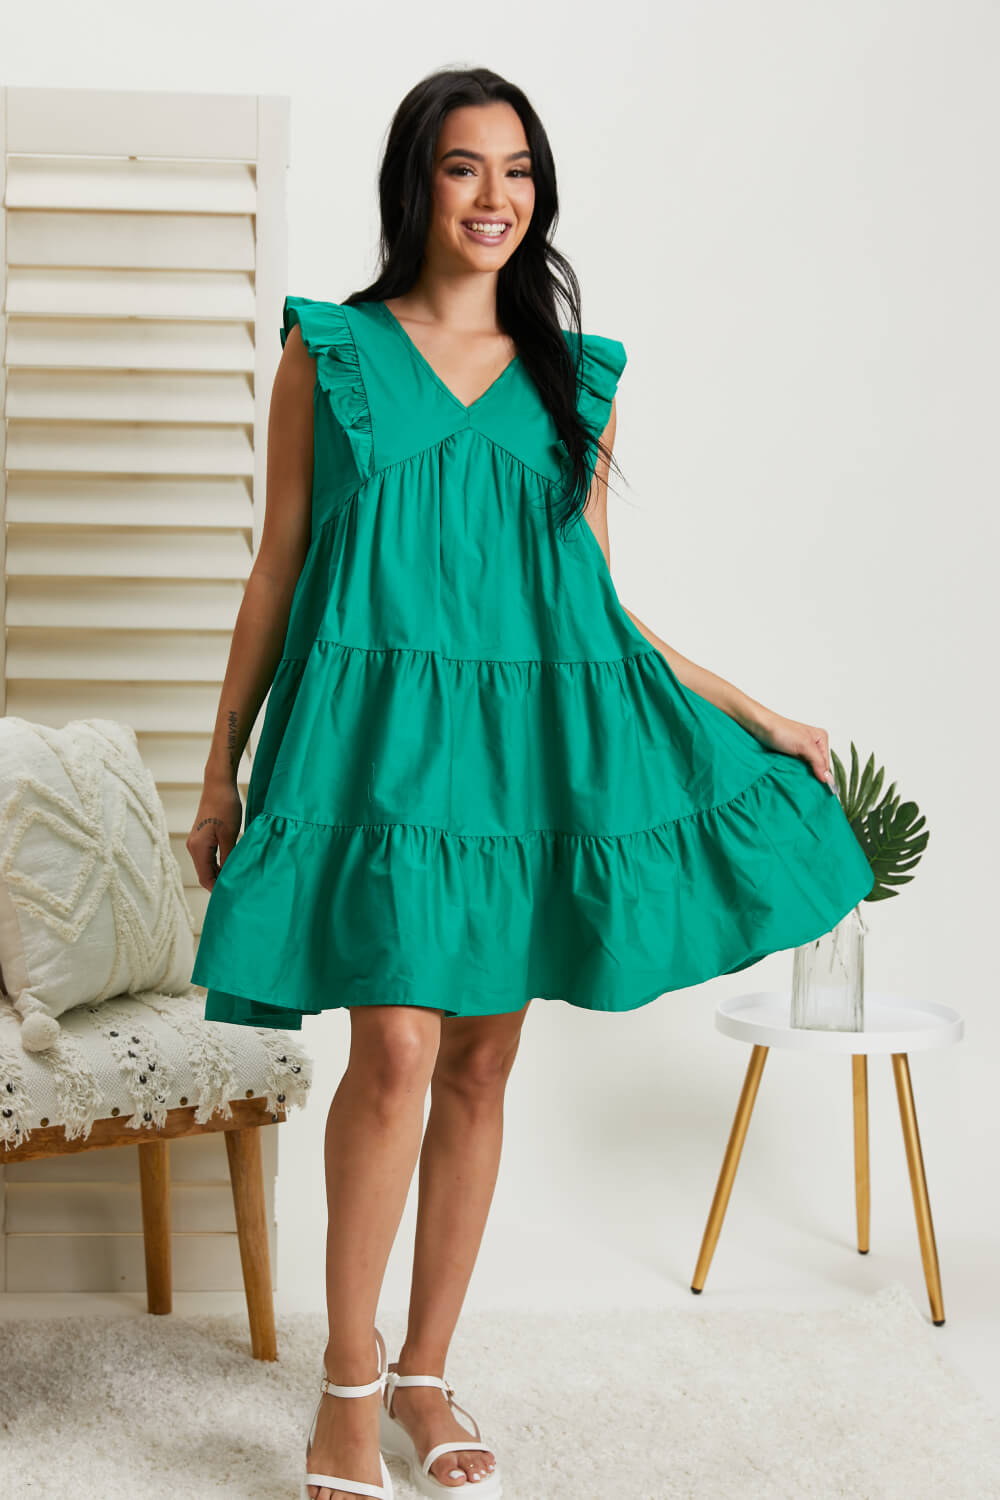 Hailey & Co Champs Elysees Tiered Dress